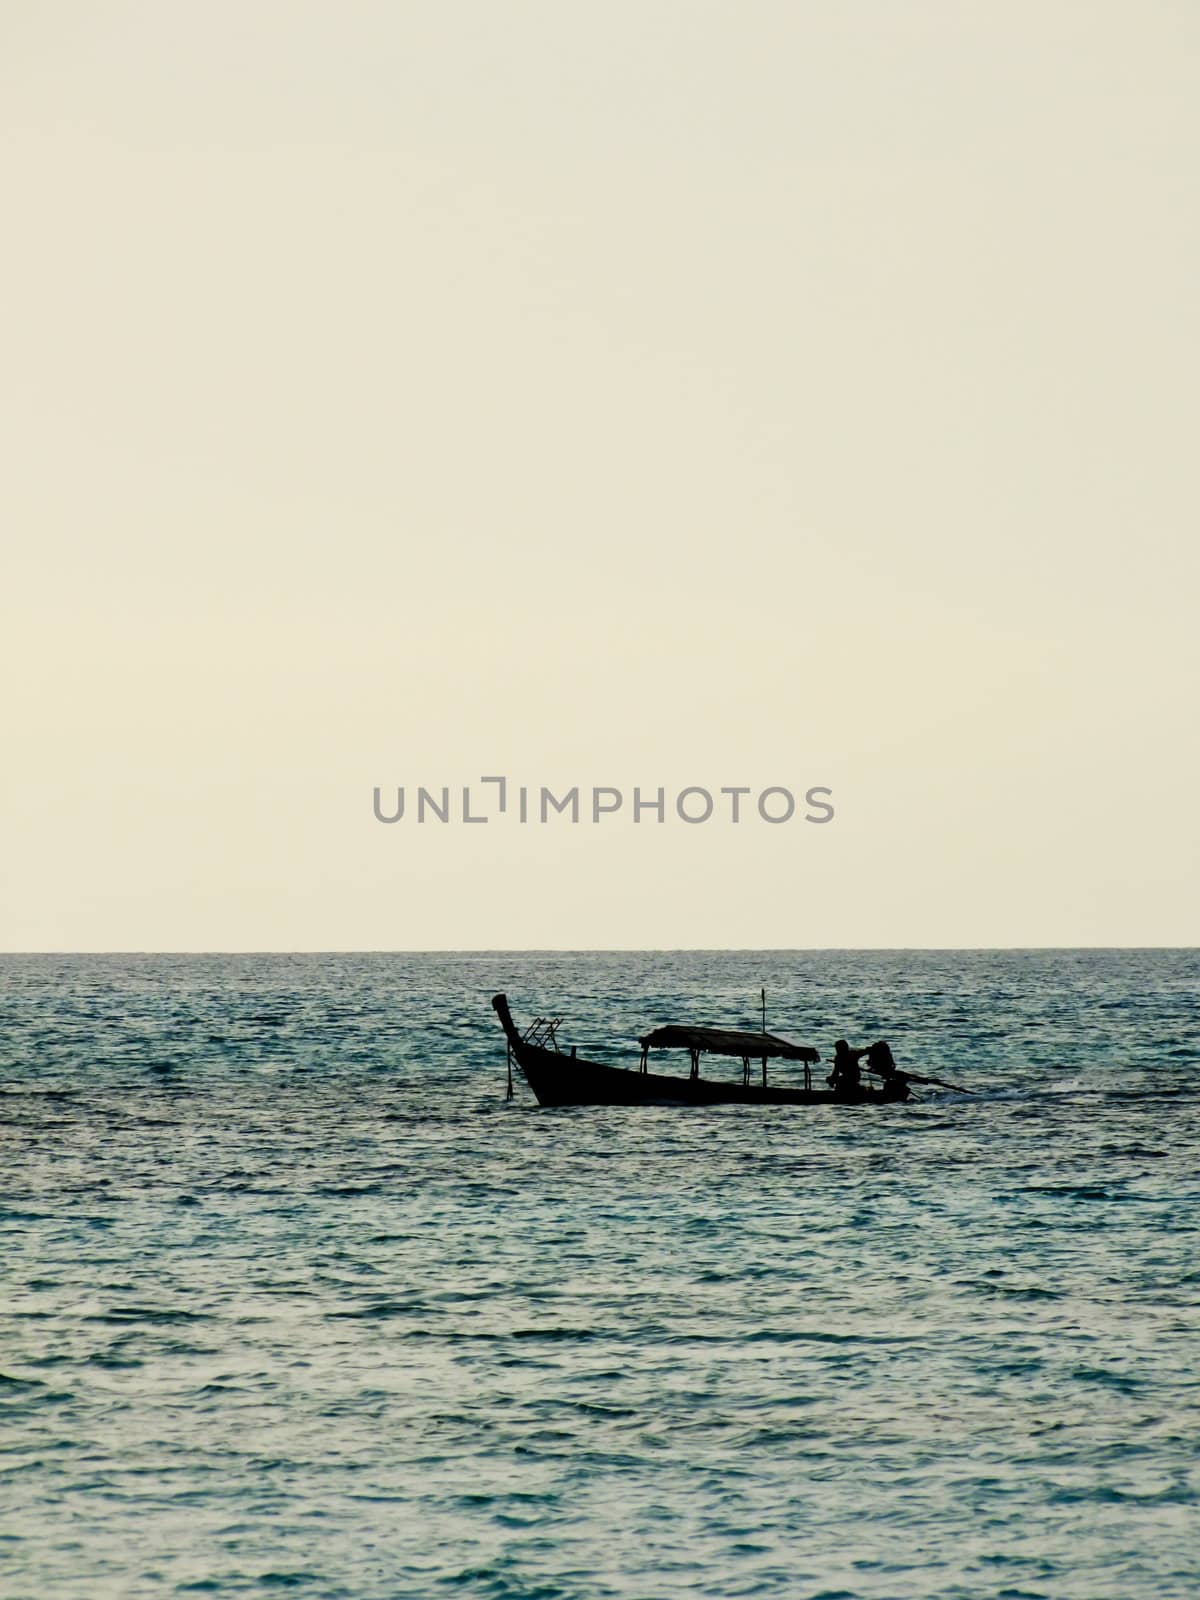 silhouette local fishing boat in Andaman sea, Thailand